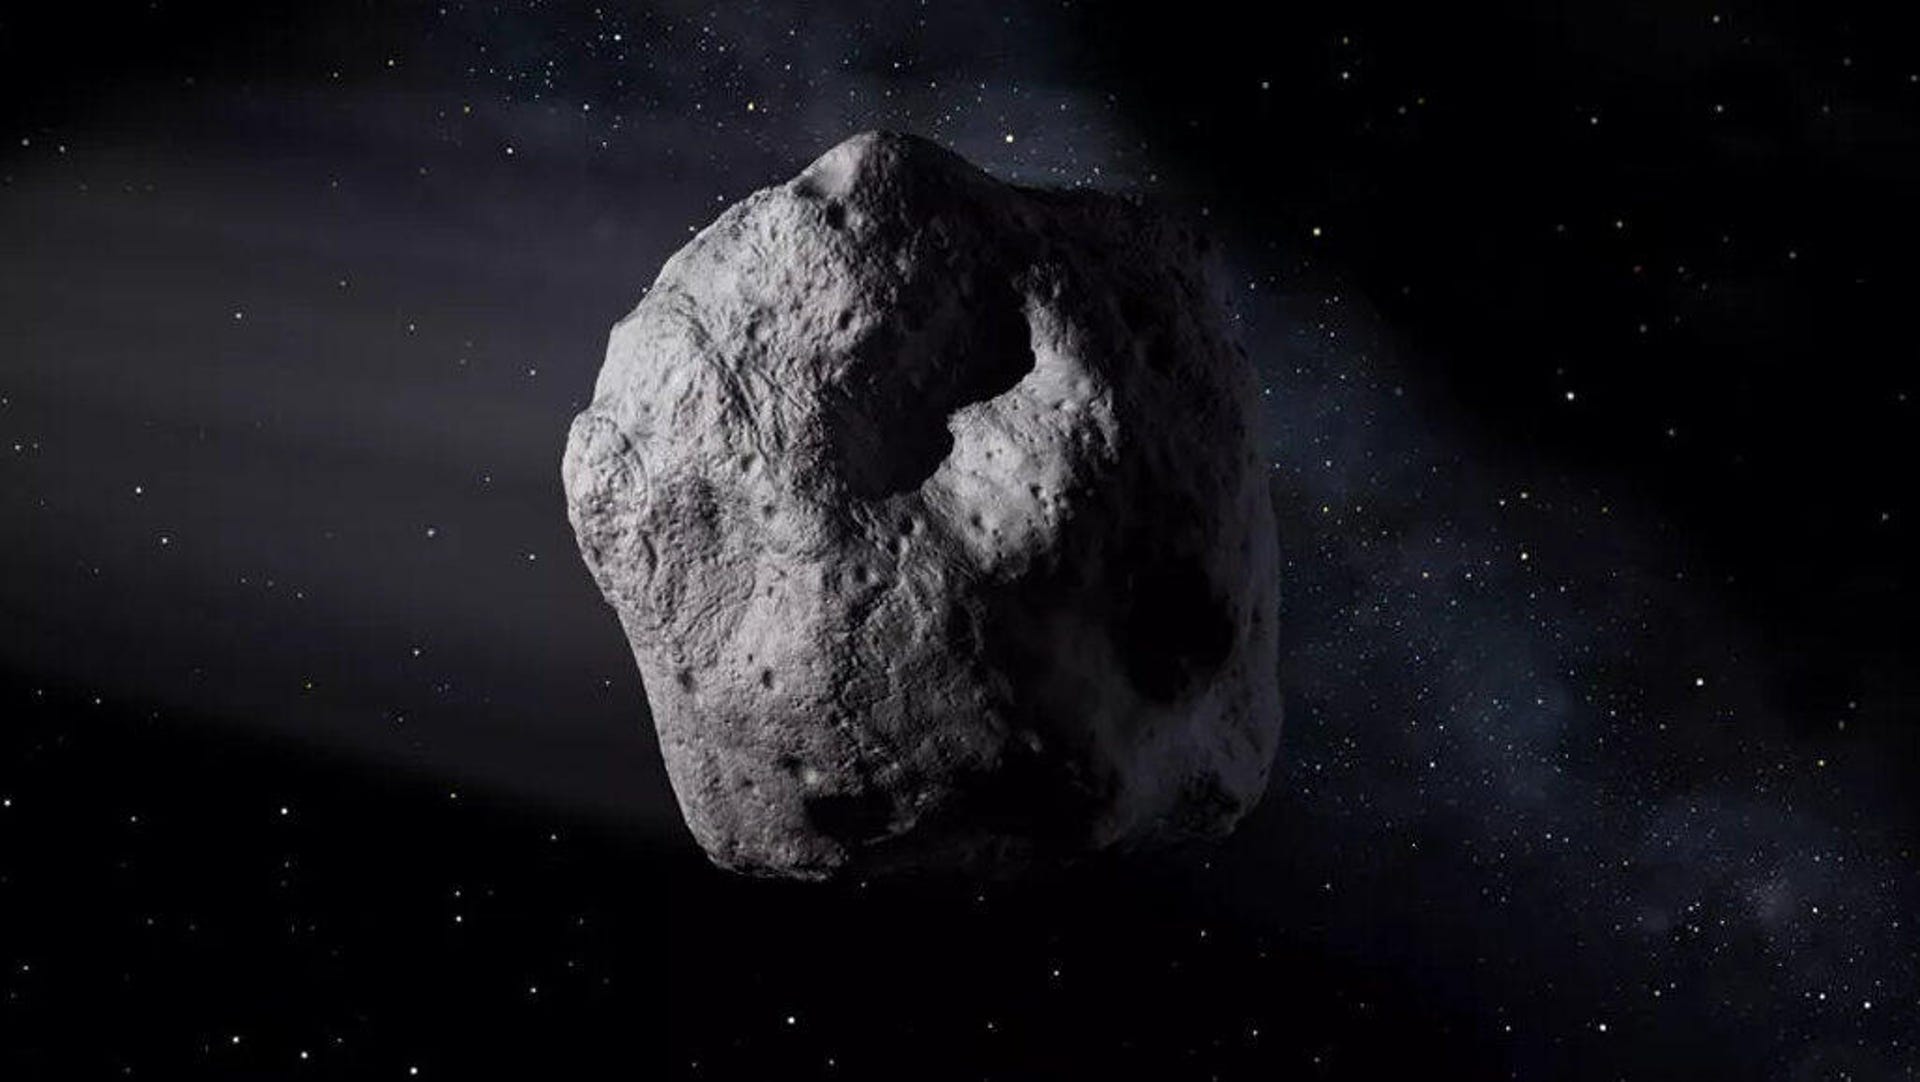 Illustration of a gray asteroid against the dark of space.